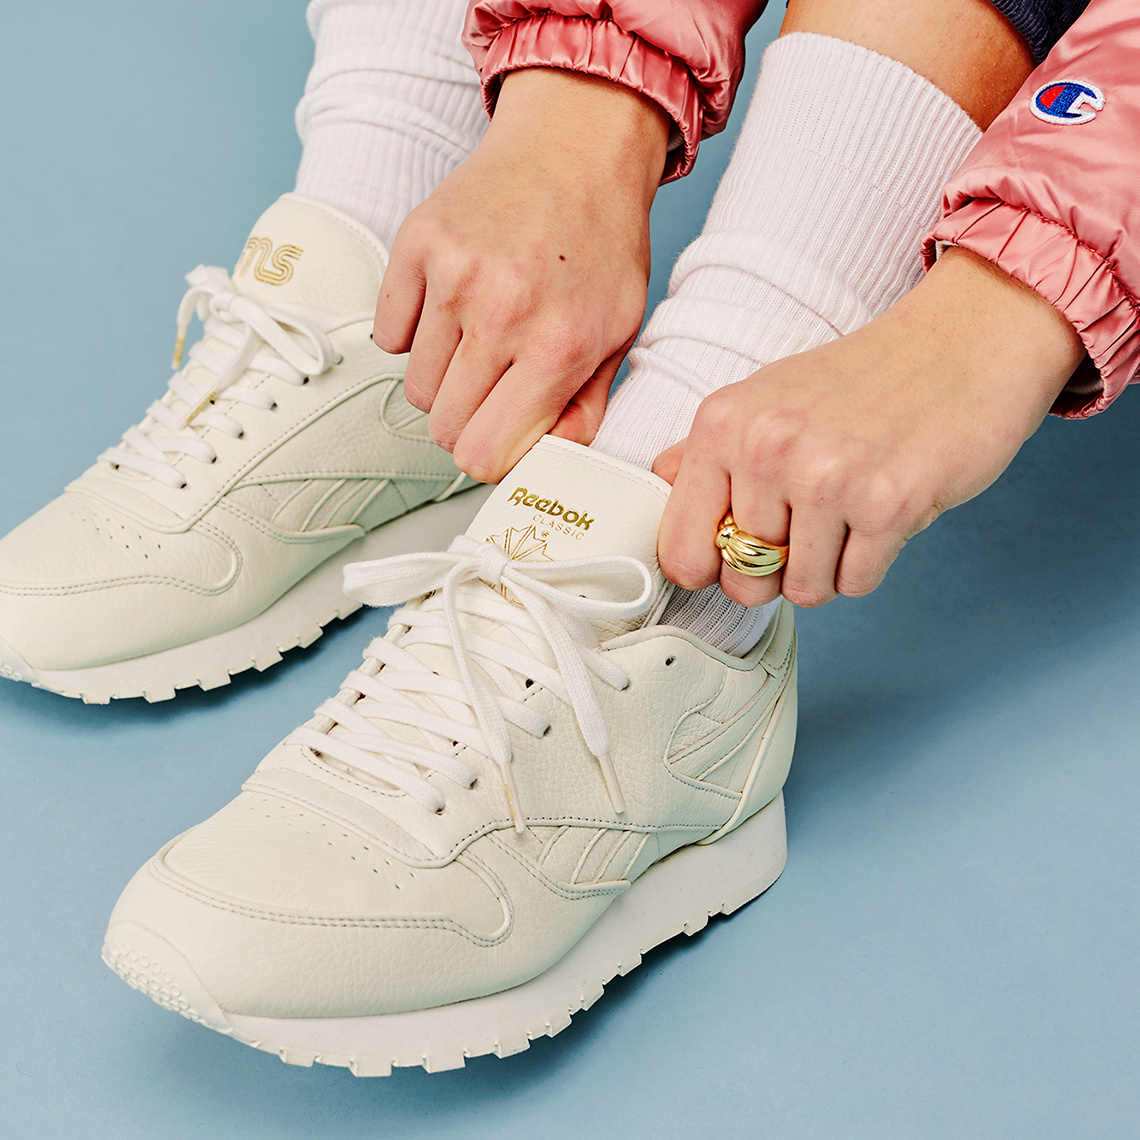 Sns X Reebok Classic Leather | vlr.eng.br